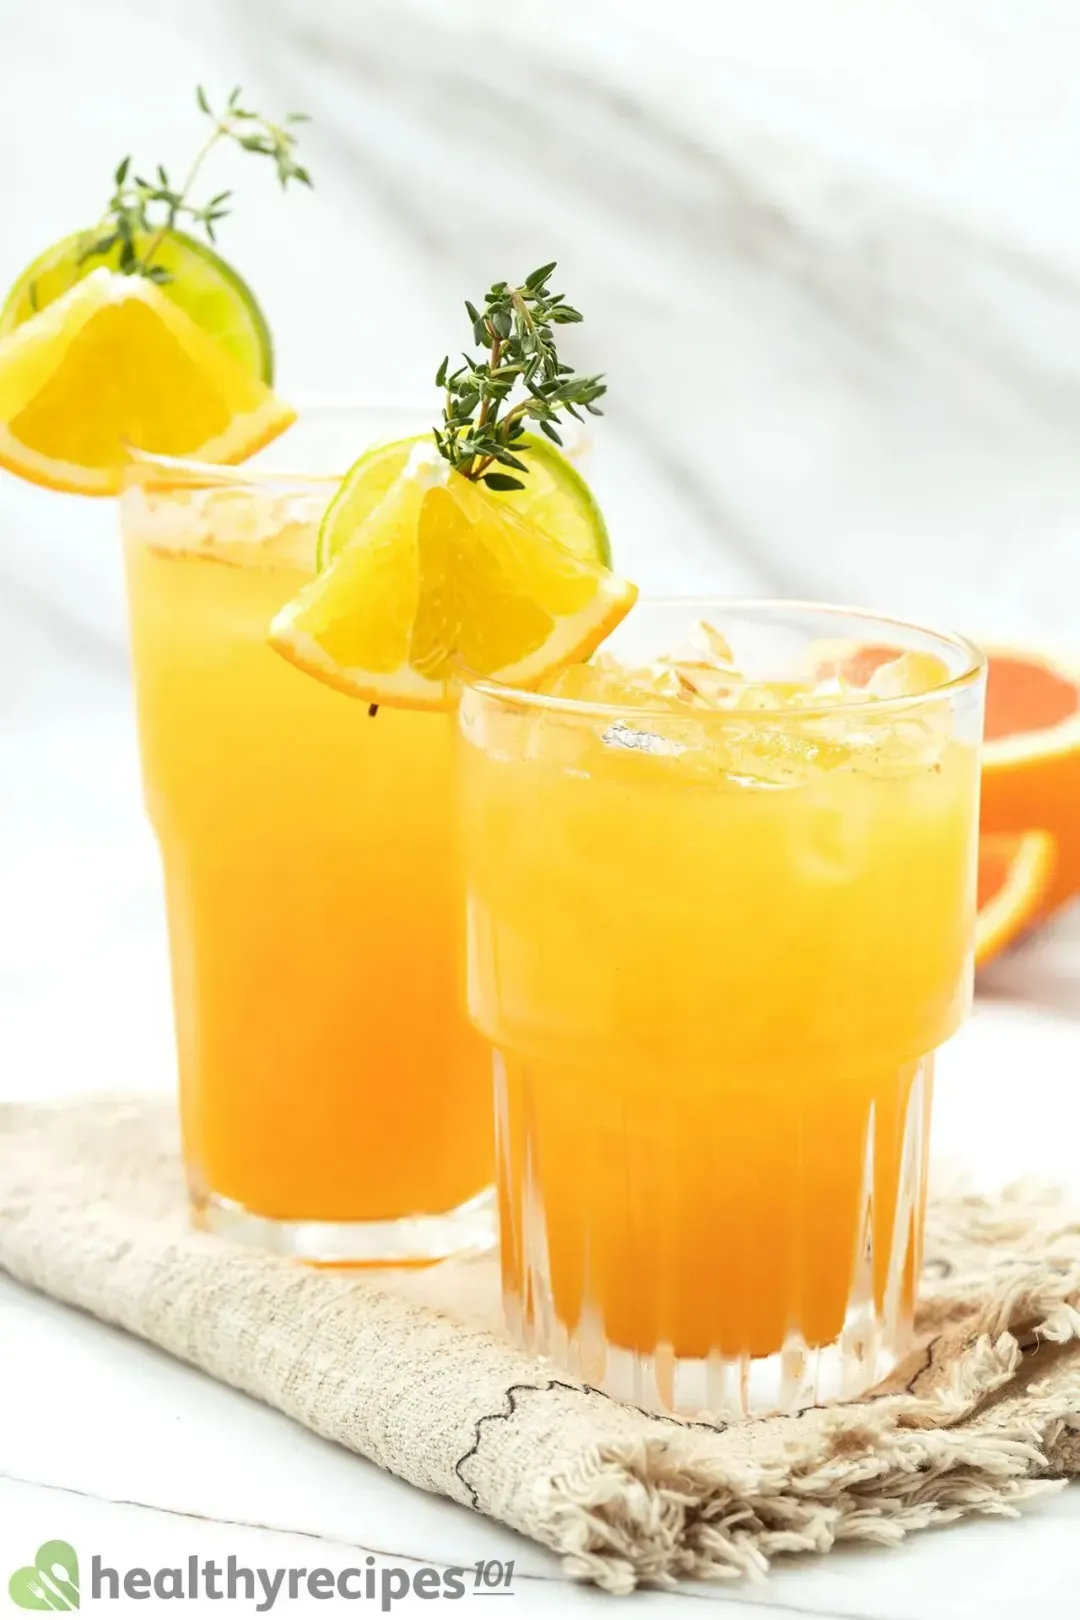 Two glasses of iced orange juice and gin cocktail garnished with citrus slices, and thyme sprigs